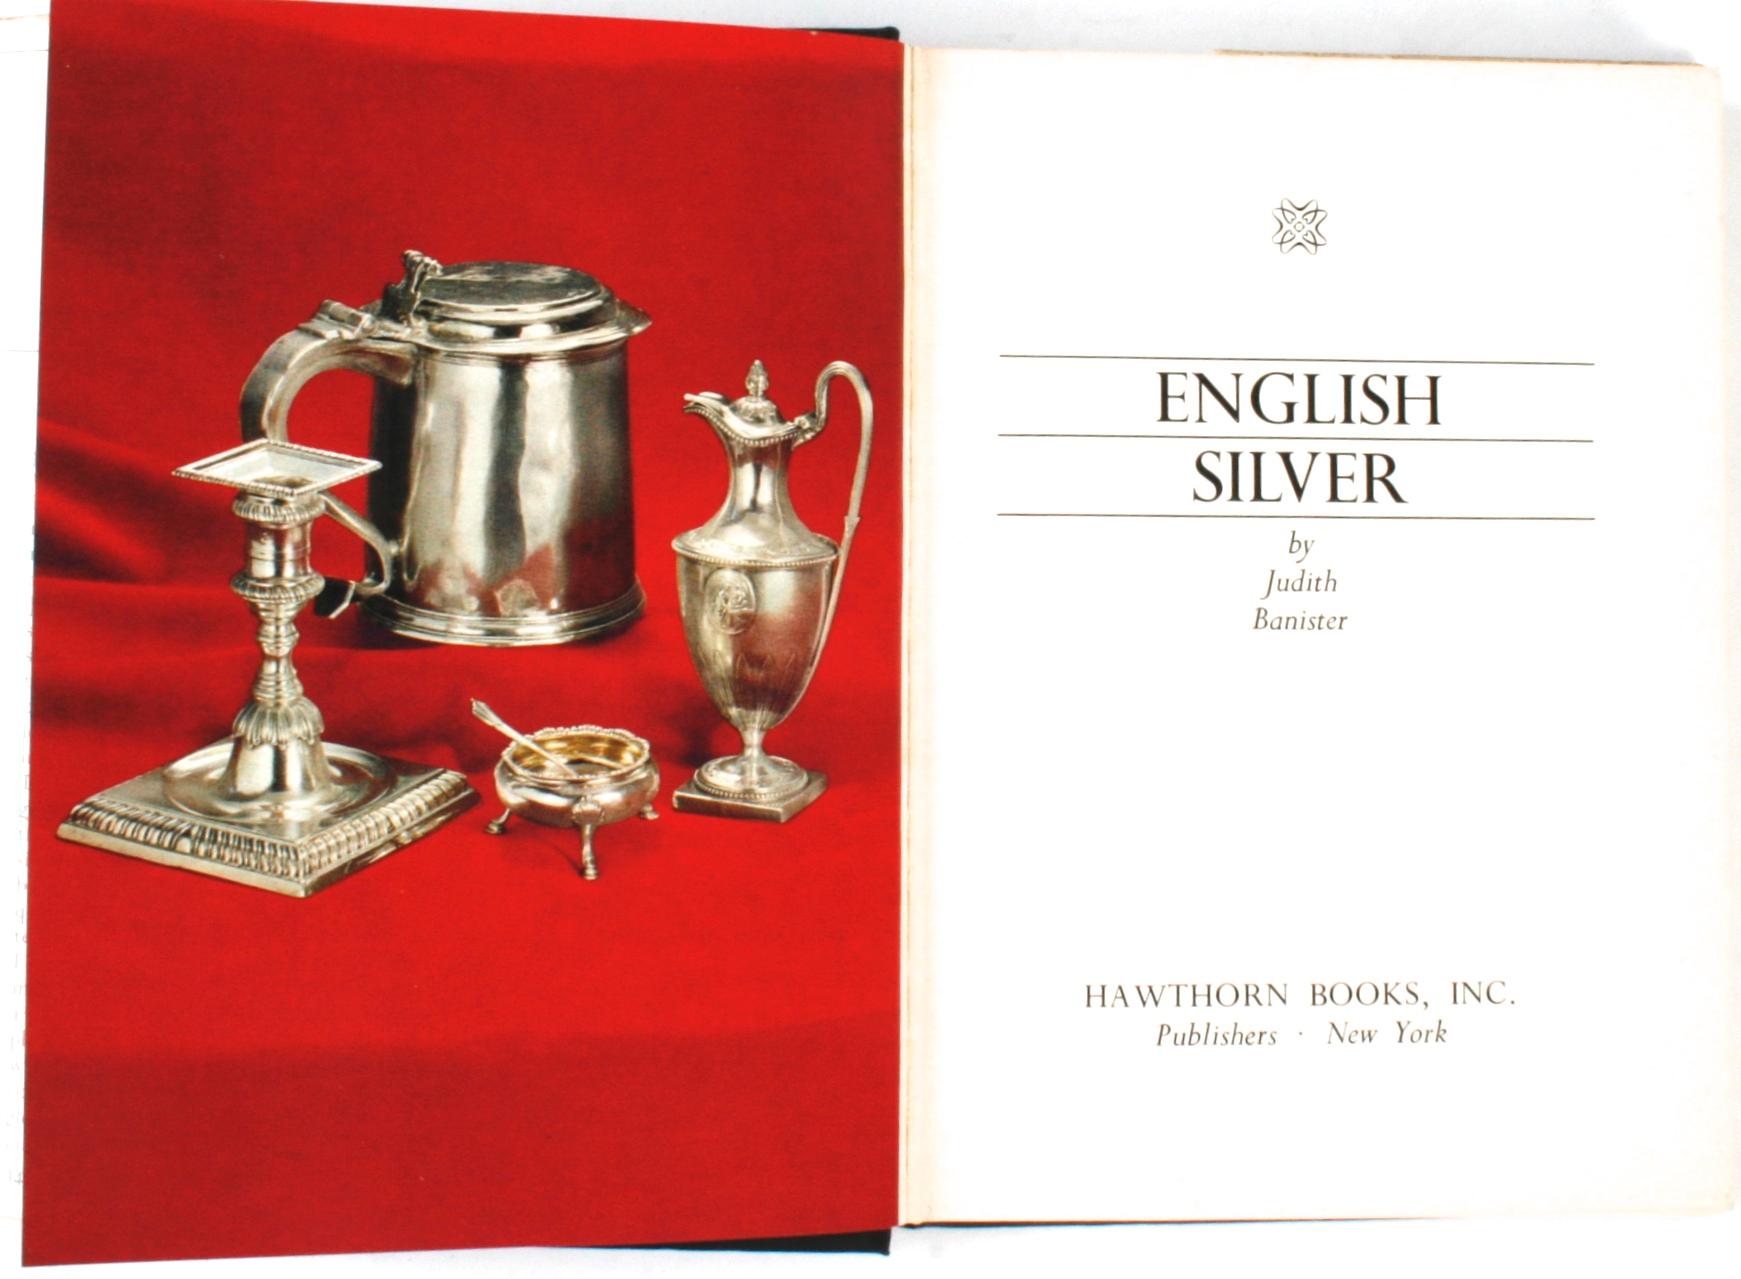 English silver by Judith Banister. New York: Hawthorn Books, Inc., 1966. First American edition hardcover with dust jacket. 251 pp. An extensive reference book and pictorial history of English silver. In the first half of the book the author traces